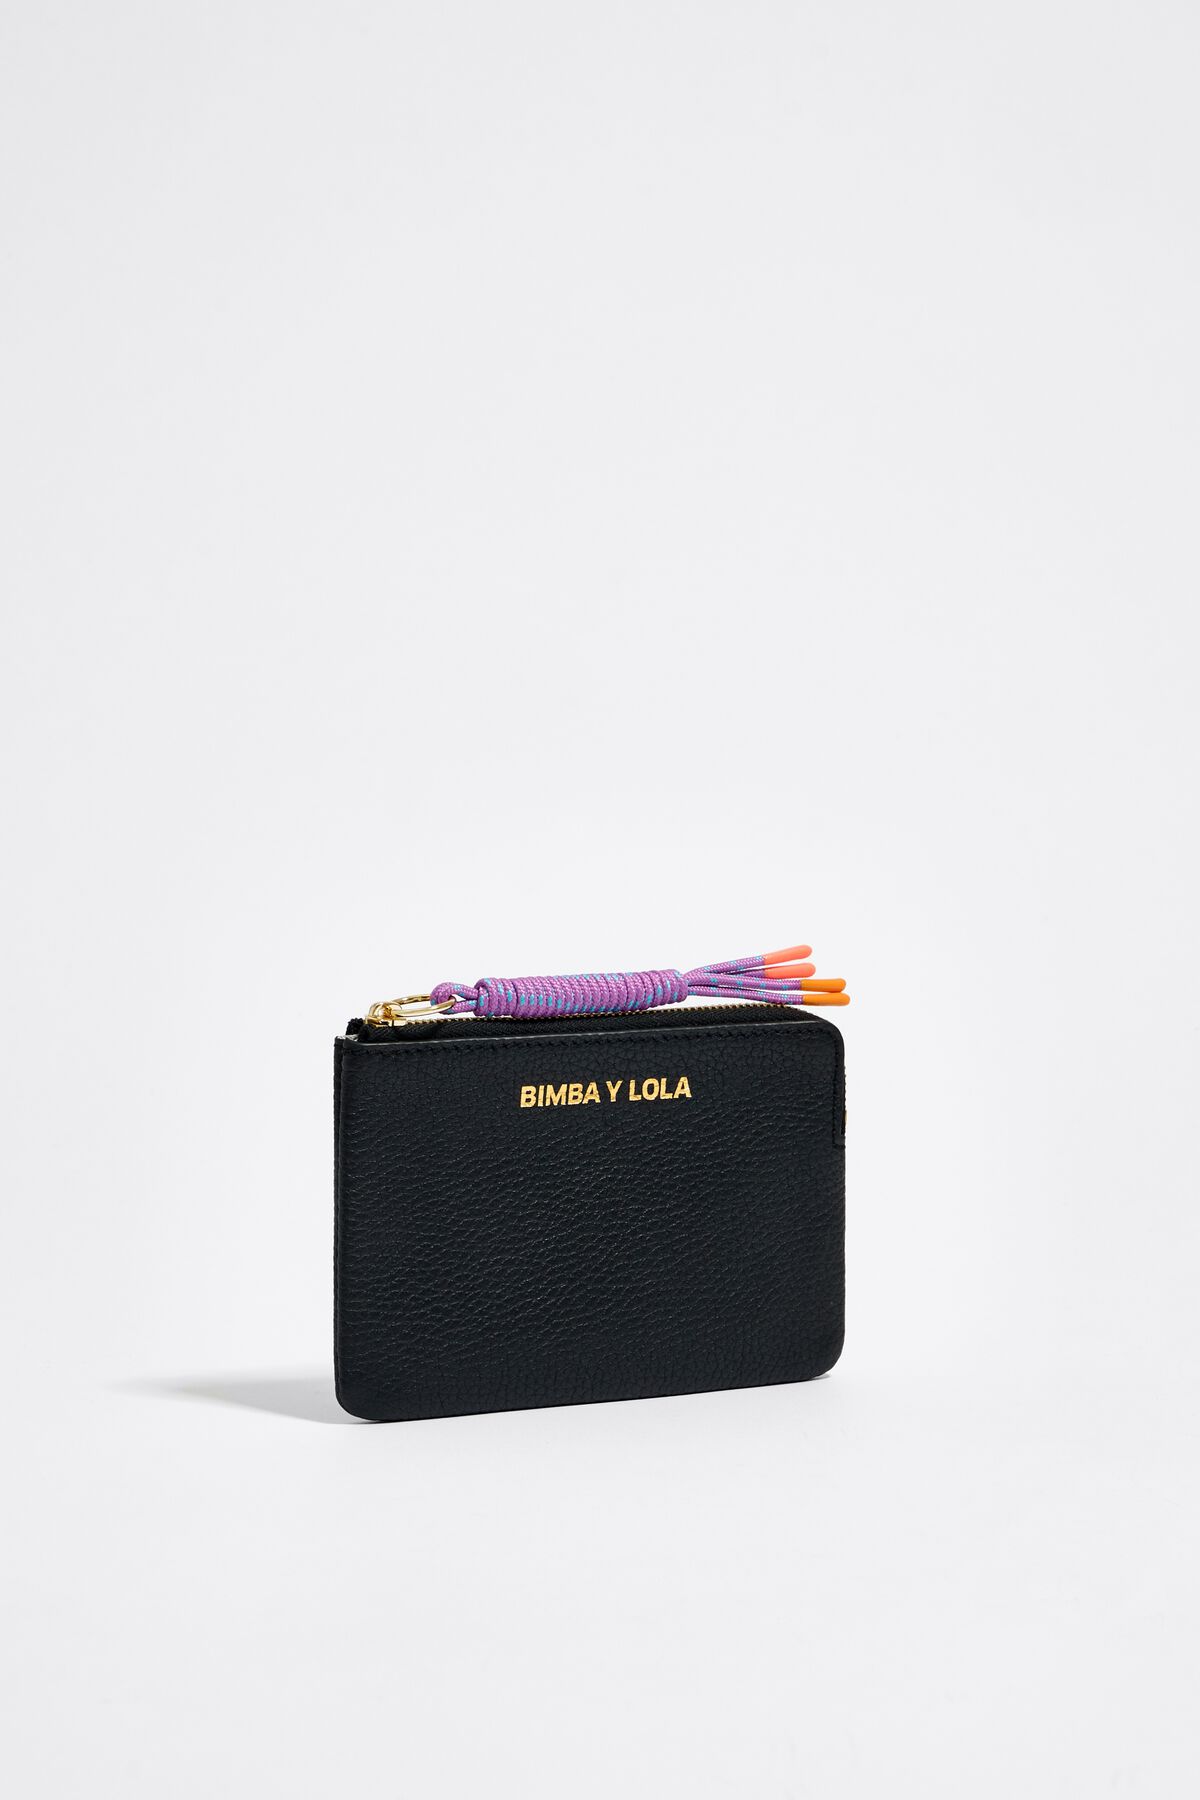 Bimba Y Lola Wallets and cardholders for Women